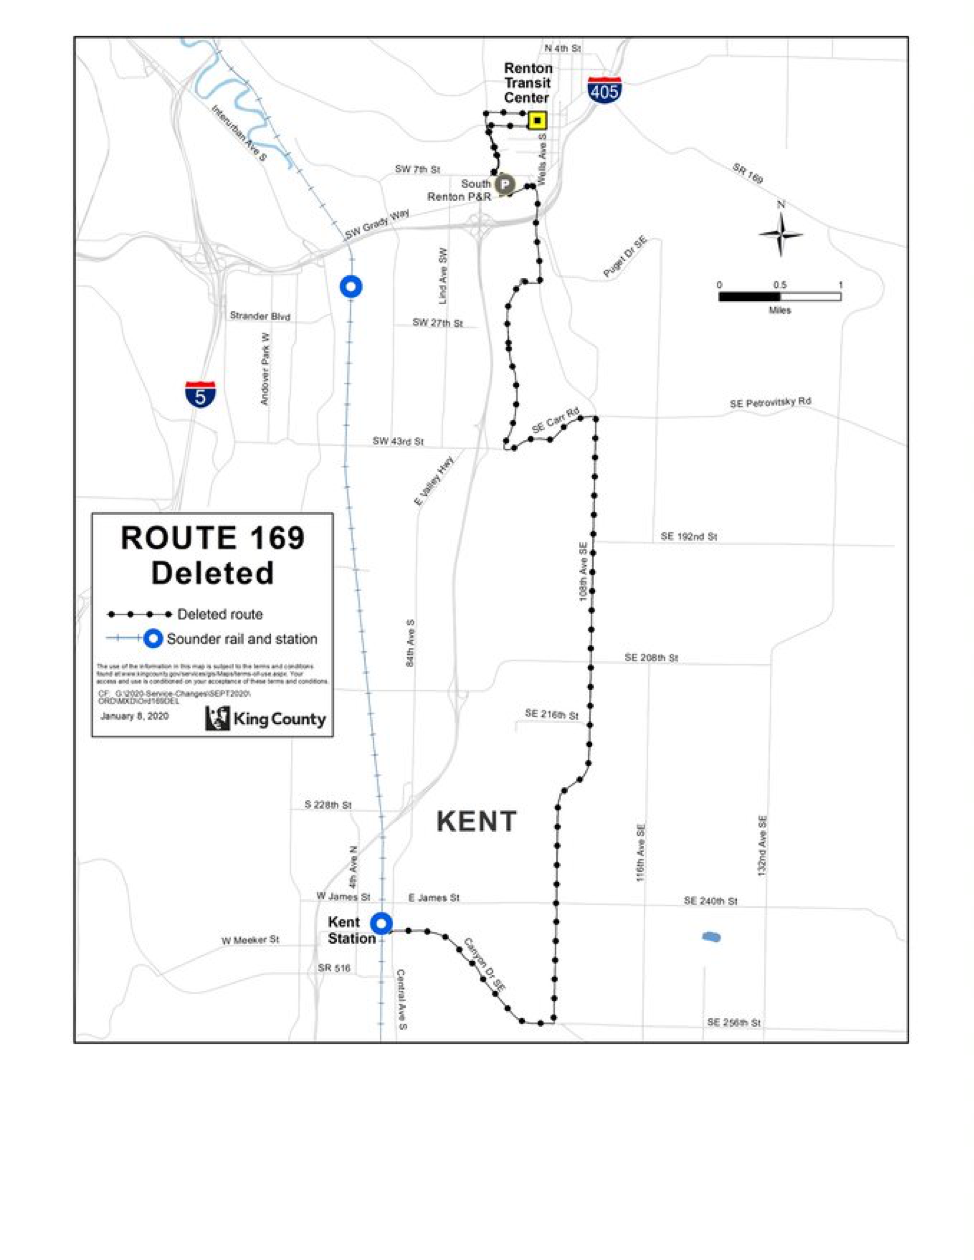 Deleted Route 169. (King County)